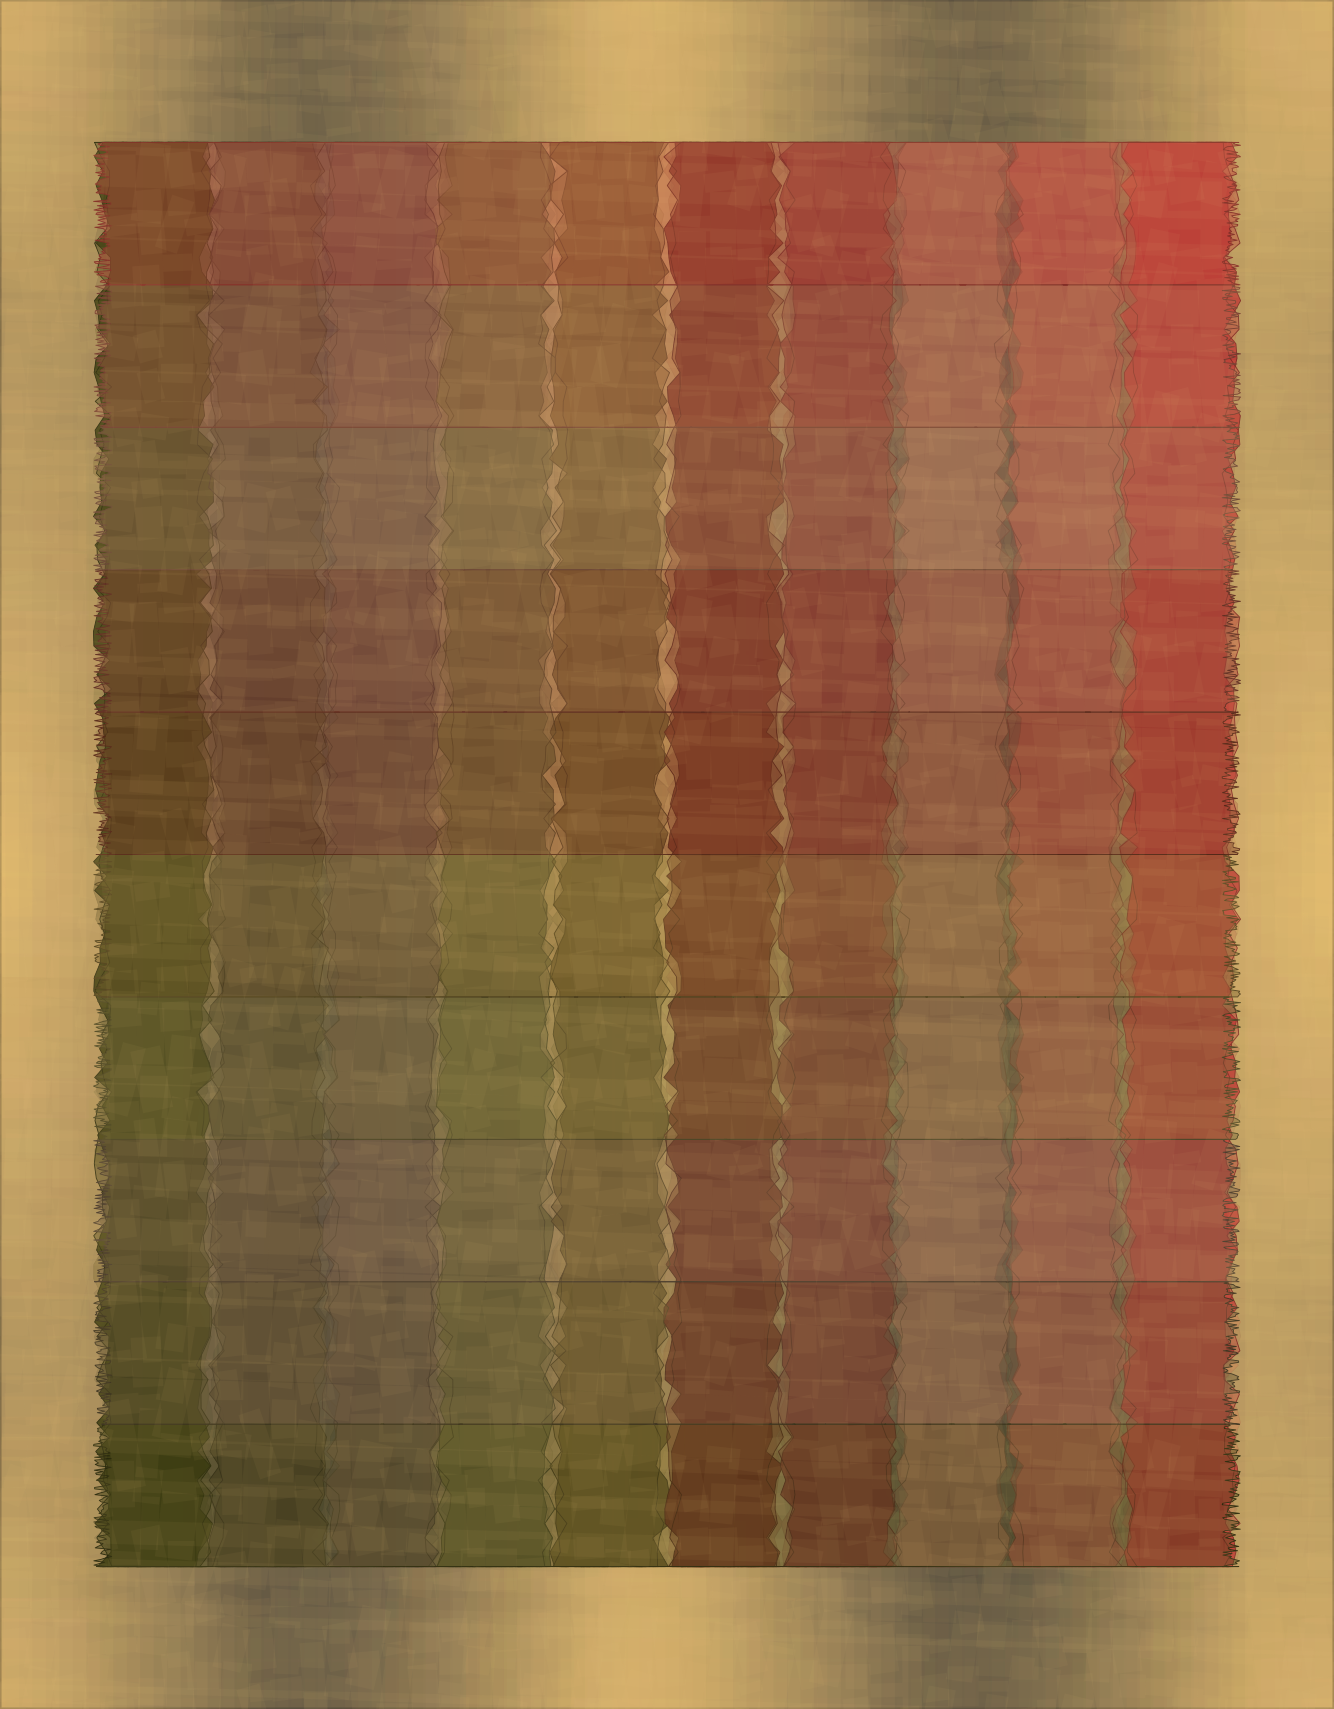 A generative art piece that shows various strips of textured fabric with various autumn-like colors (greens, reds) on a light tan gradient background.